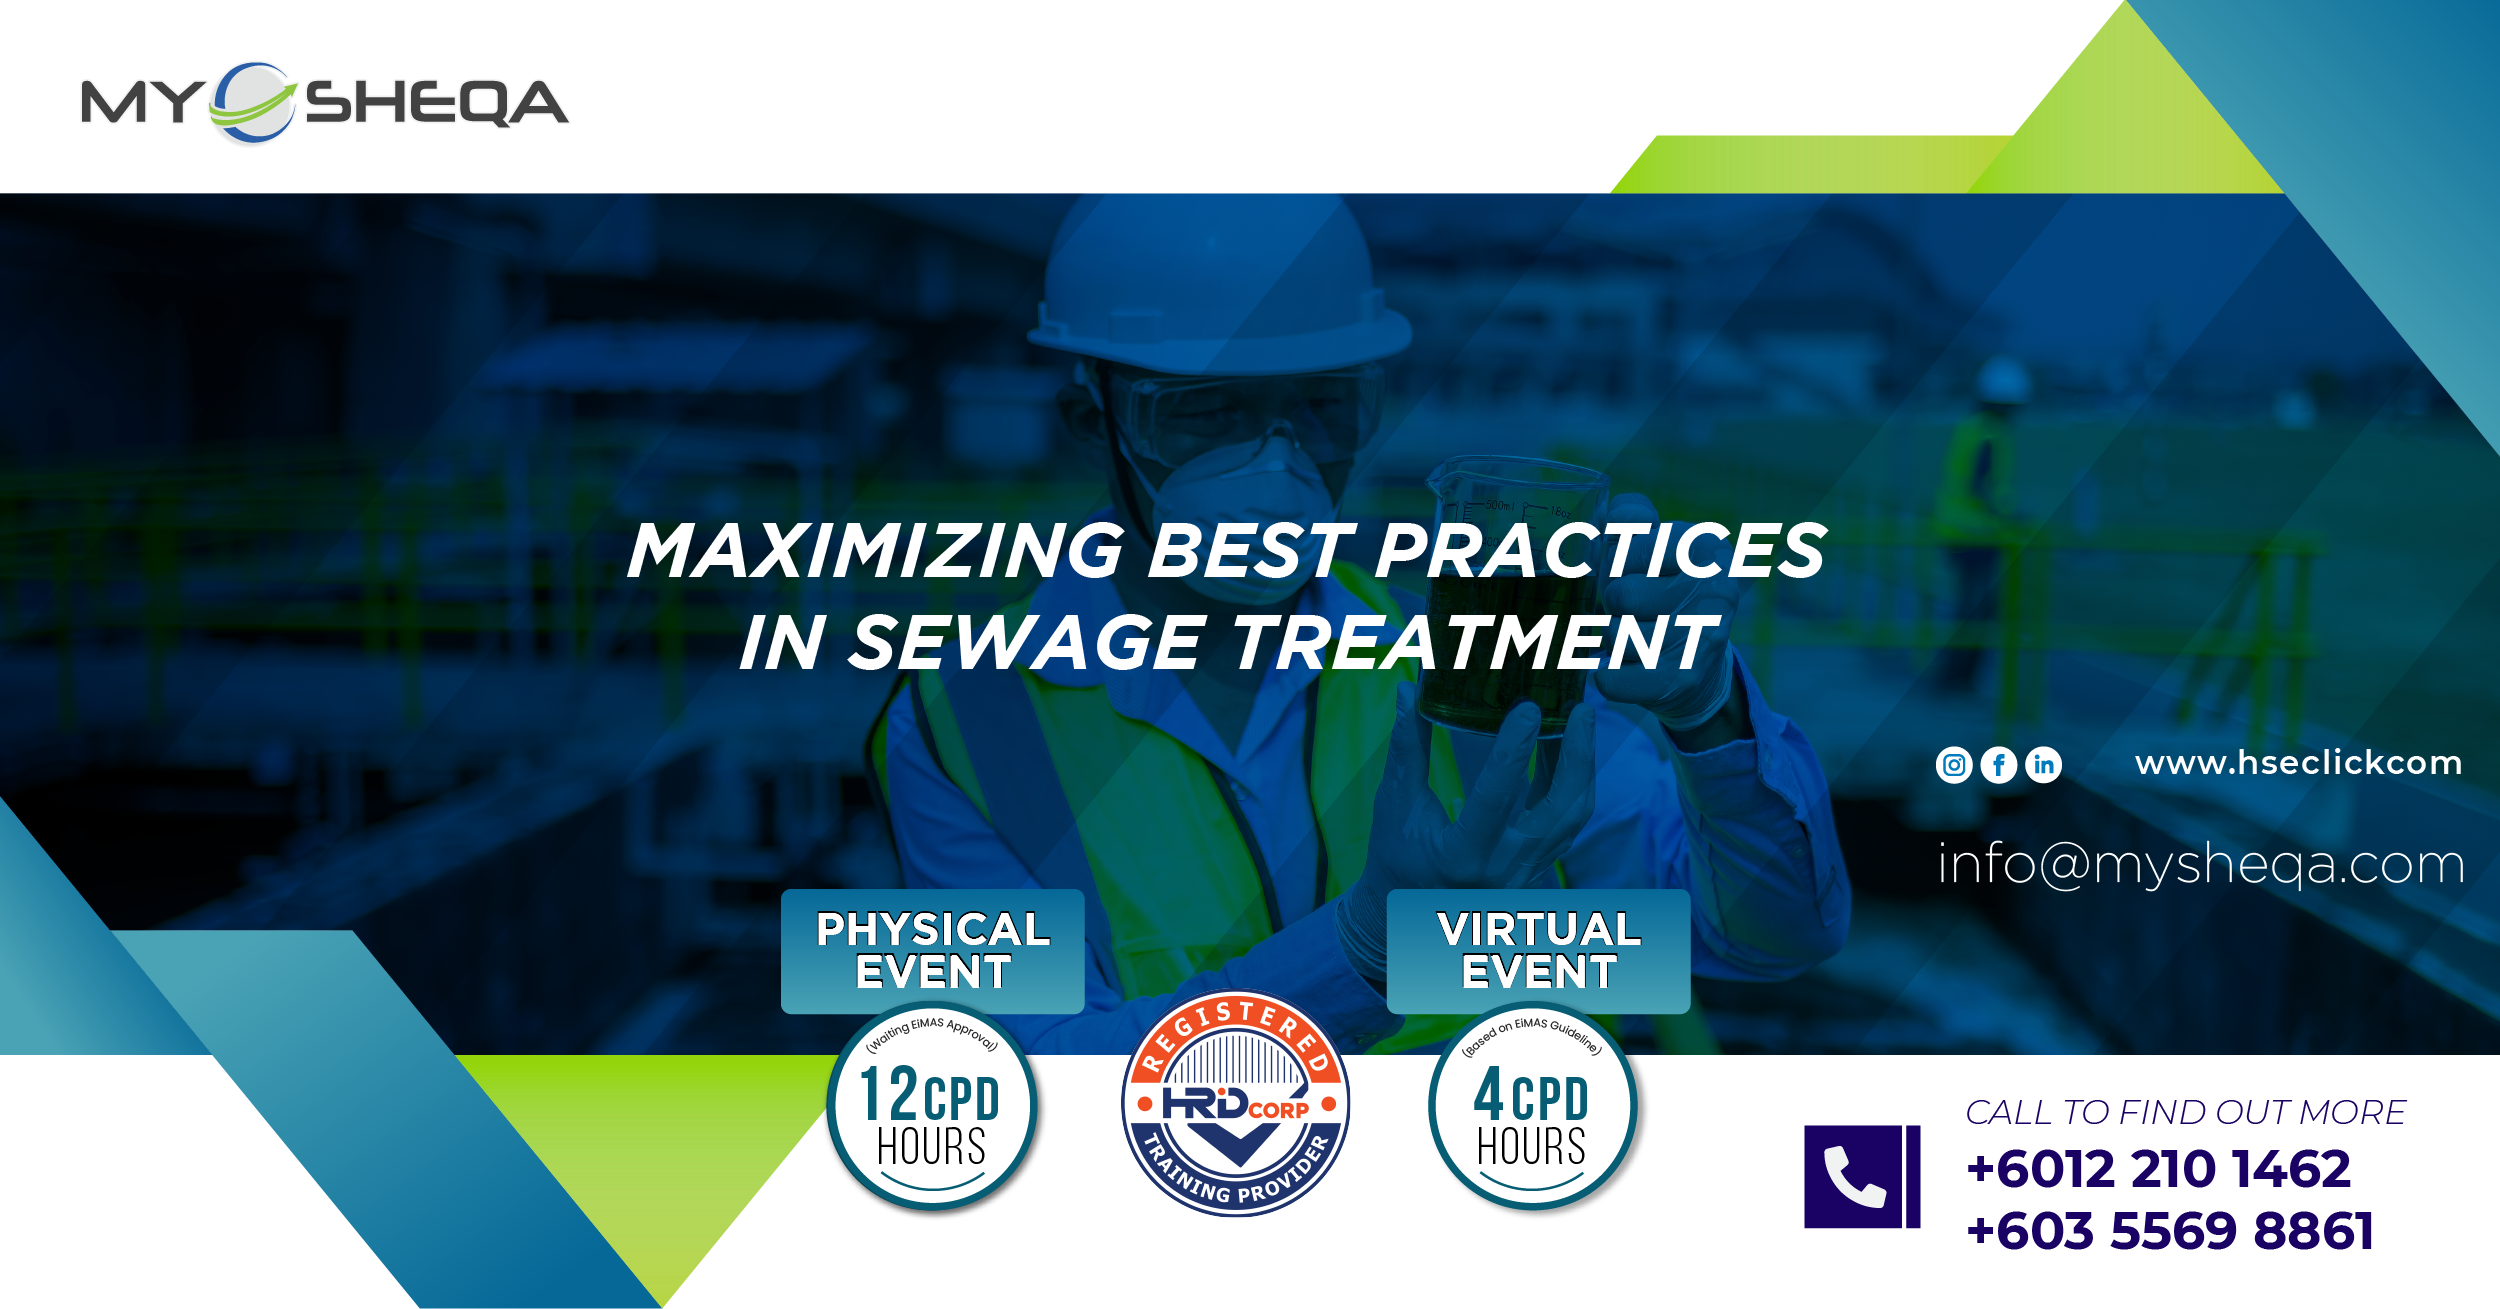 Maximizing best practices in sewage treatment